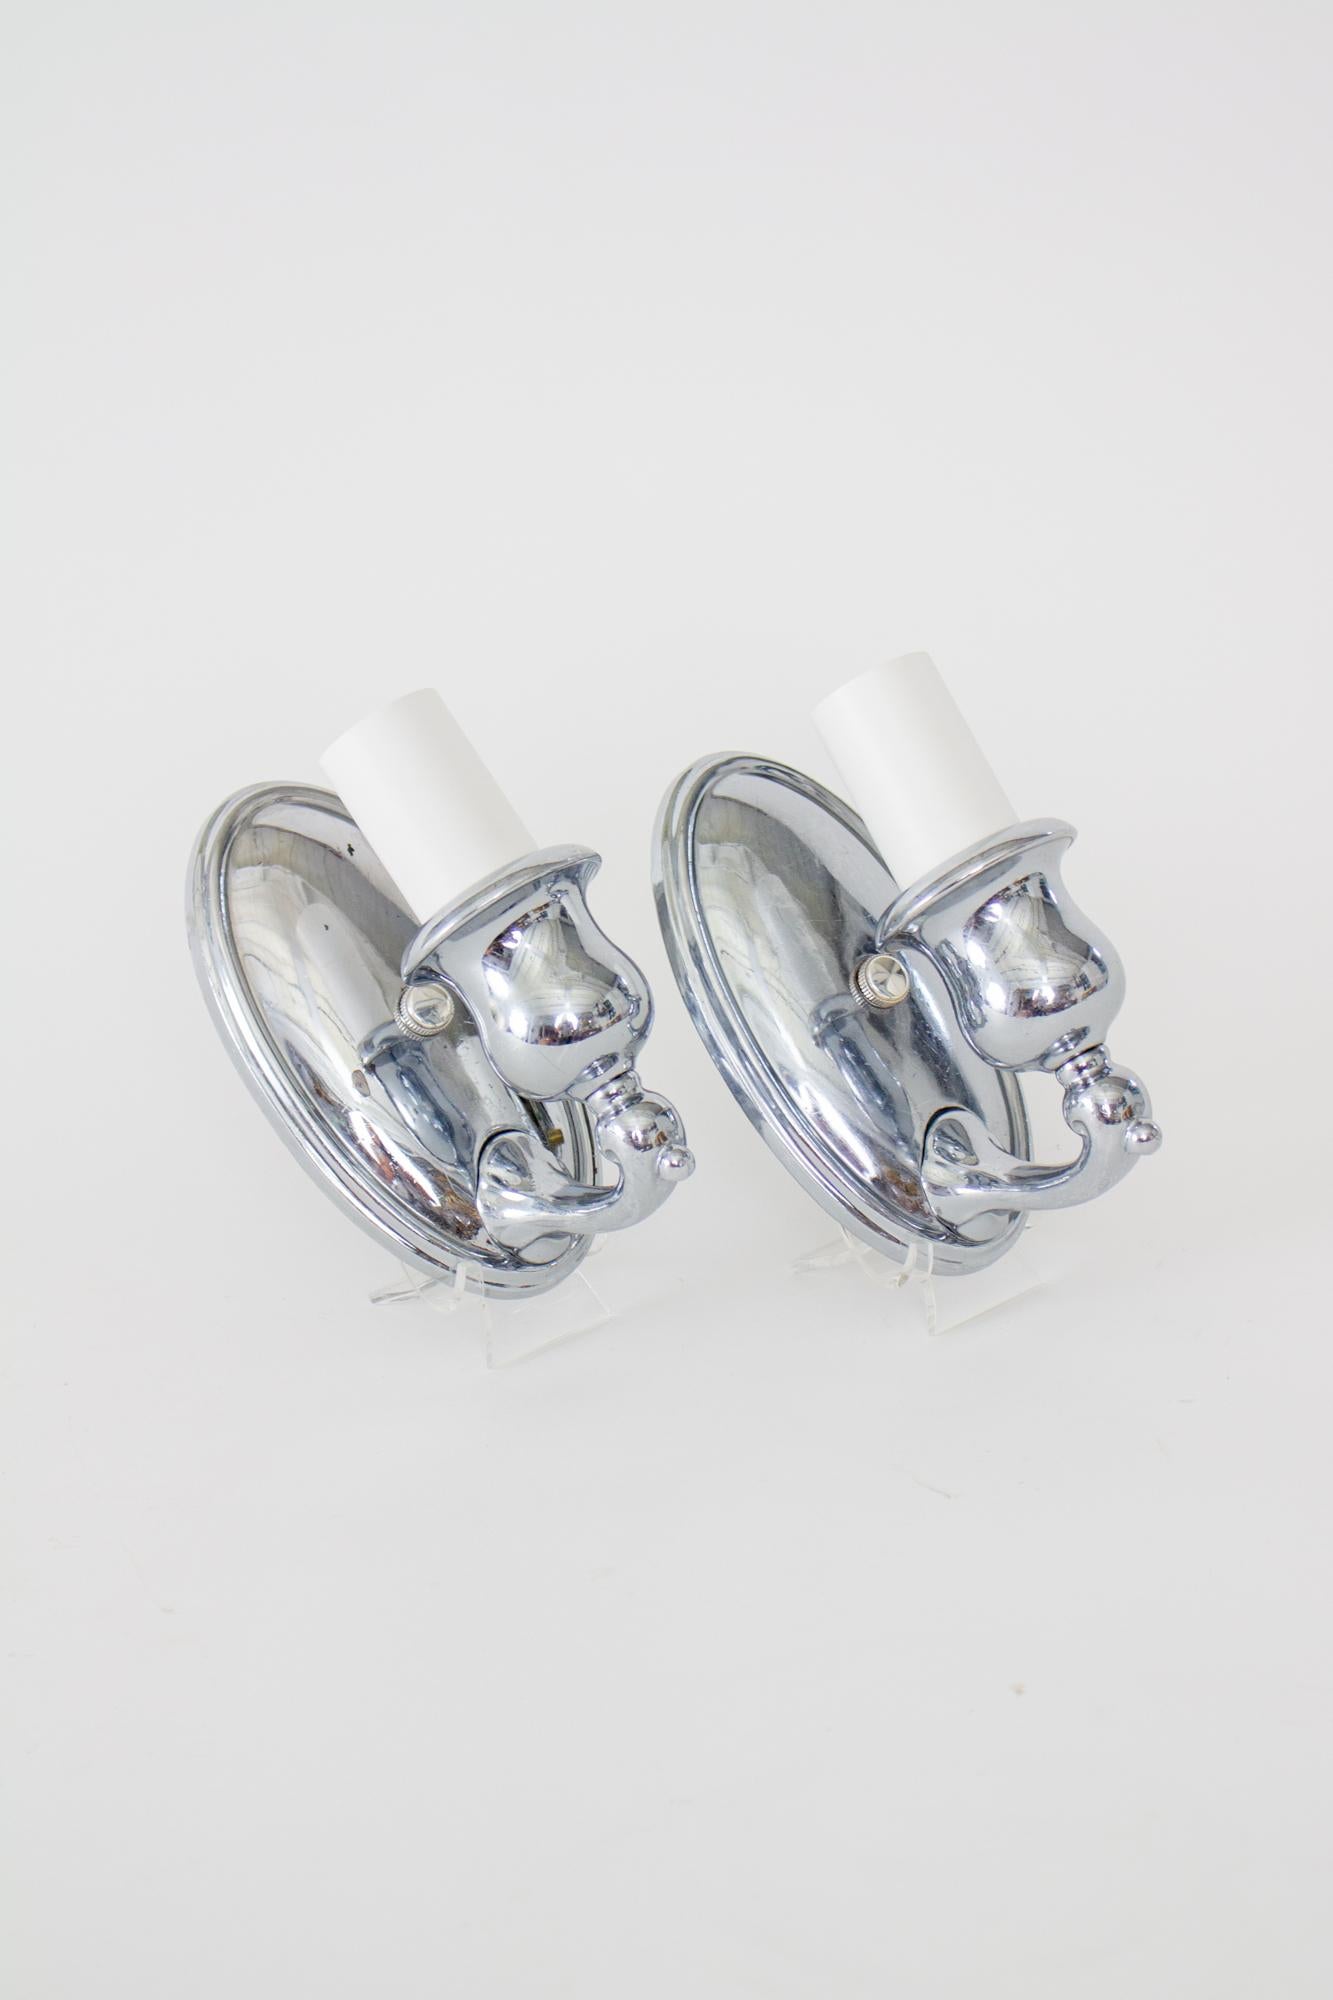 Edwardian Early 20th Century Bradley and Hubbard Chrome Sconces - a Pair For Sale